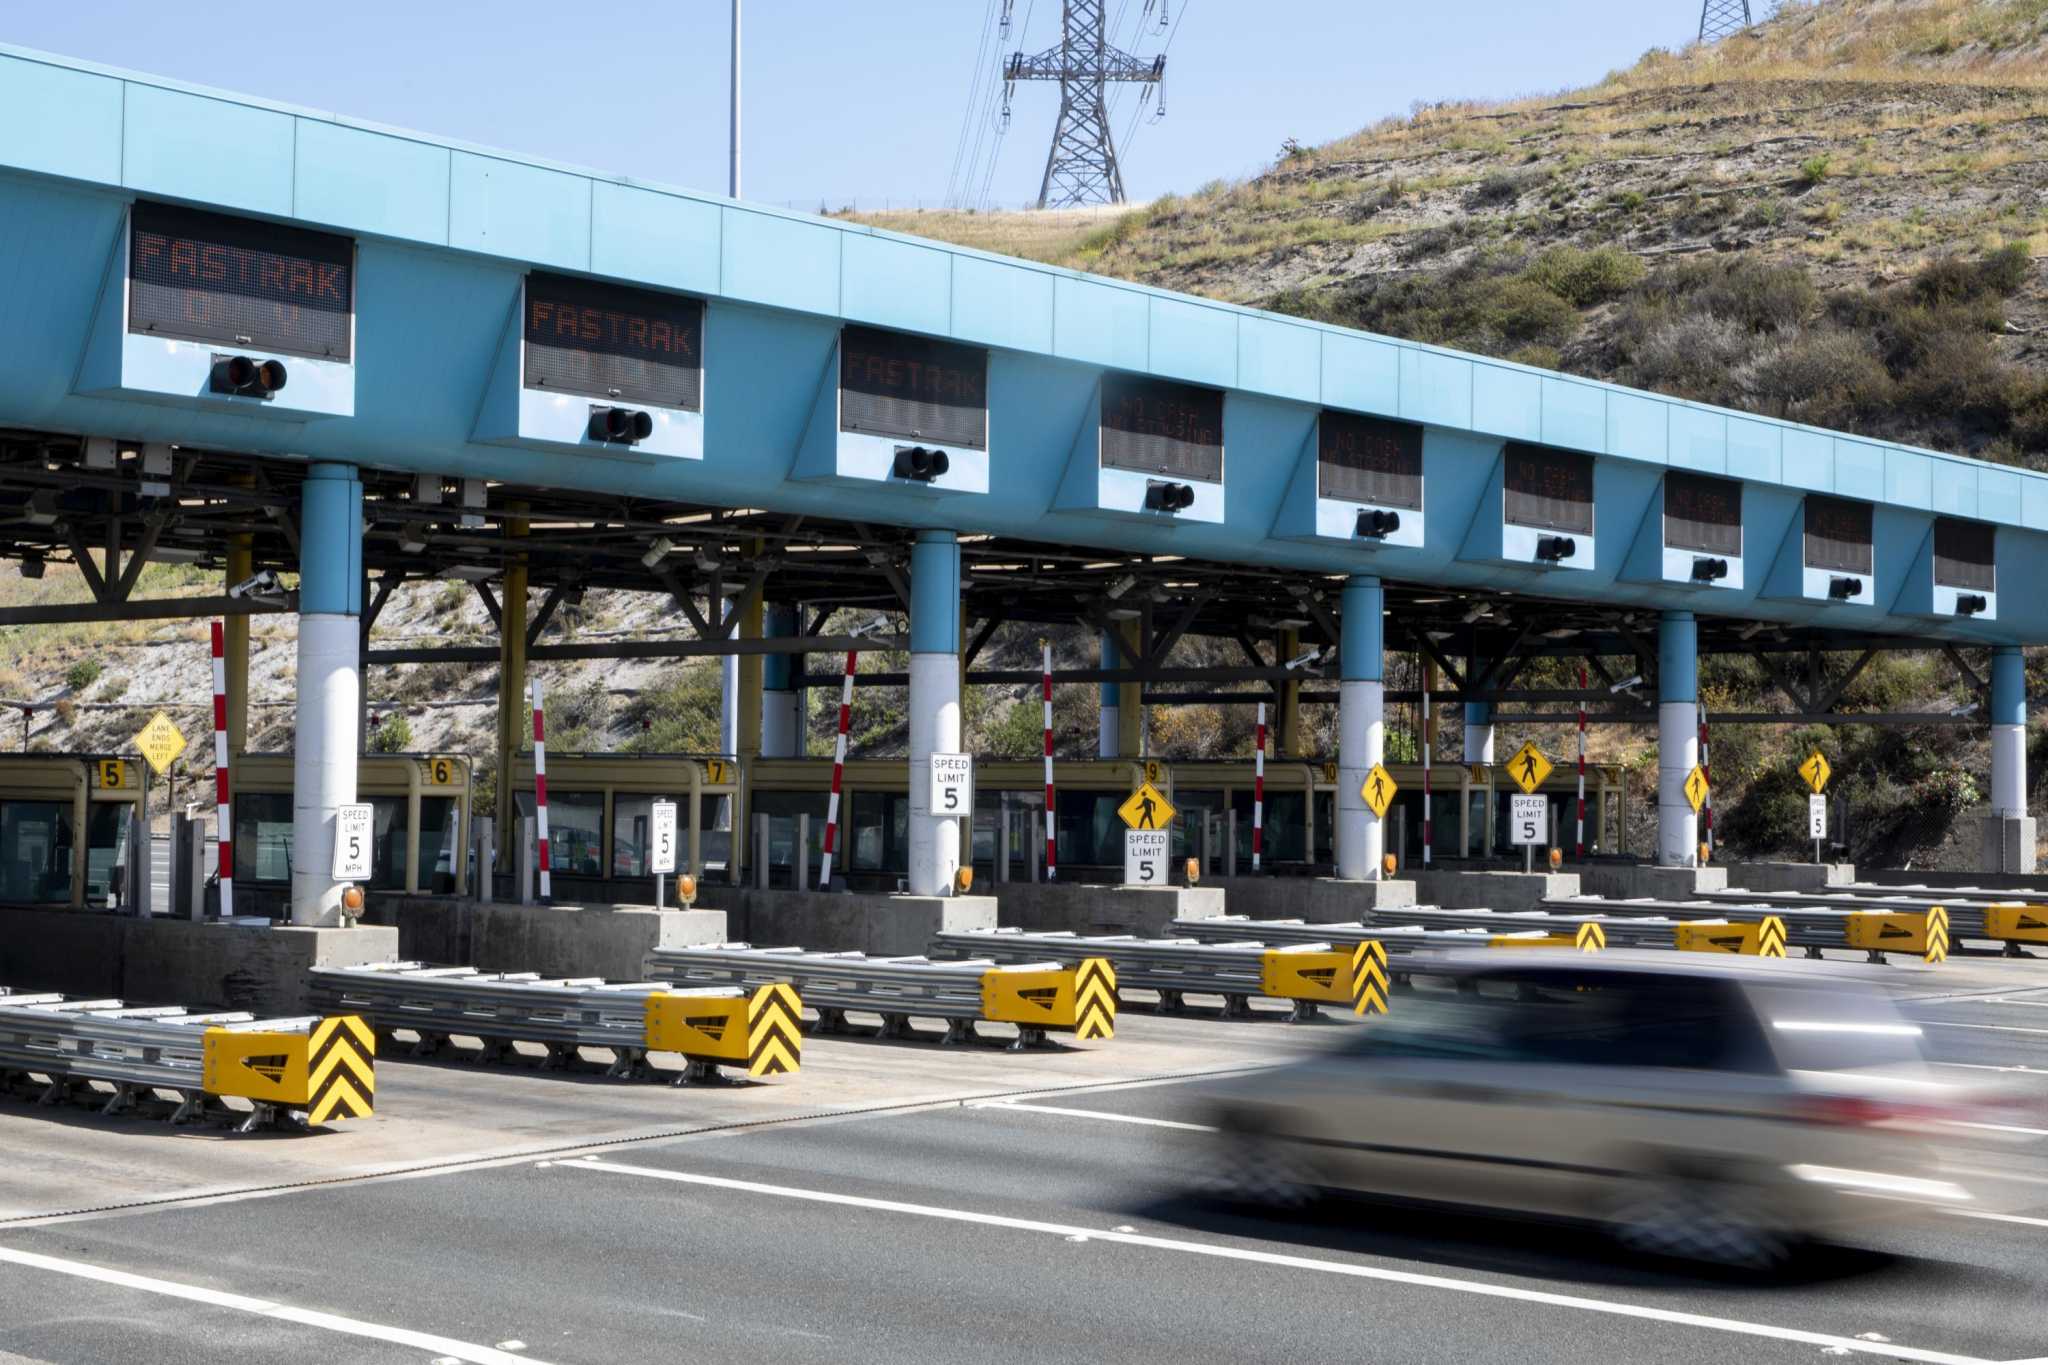 Tolls on seven Bay Area bridges will soon go up. Here’s what you need